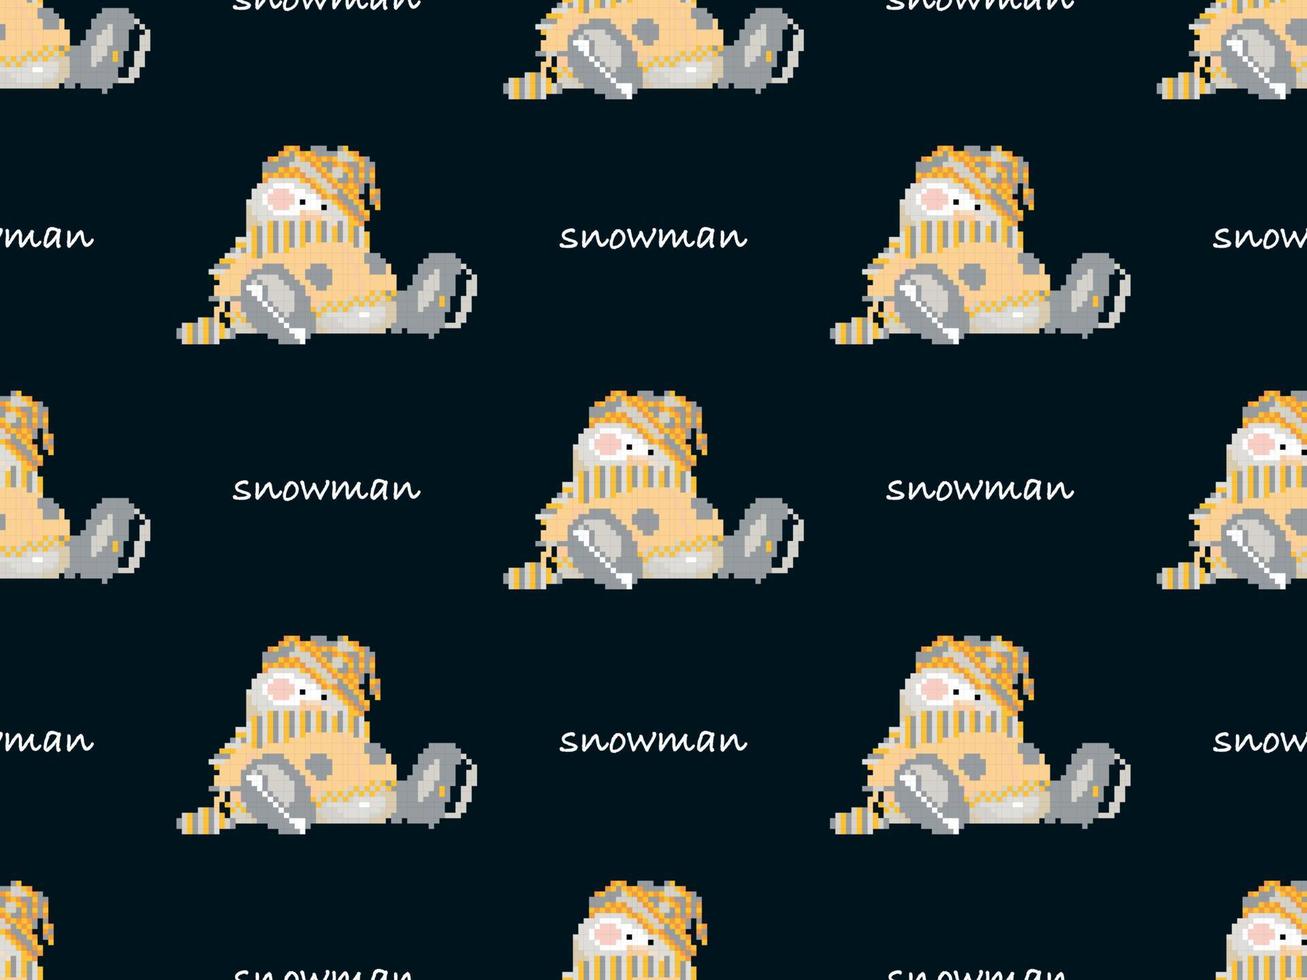 Snow man cartoon character seamless pattern on black background.  Pixel style vector